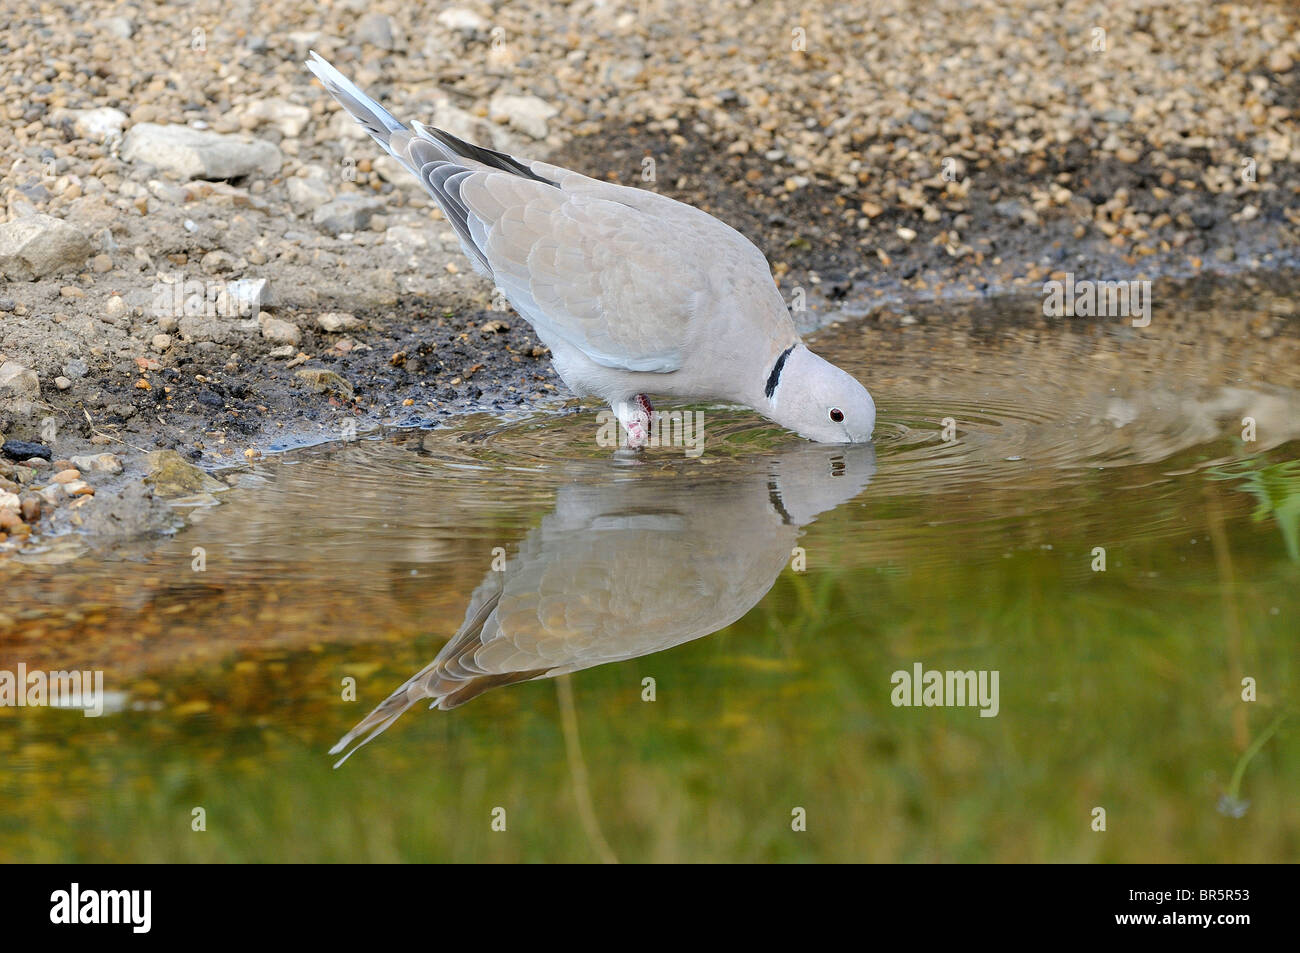 Collared Dove (Streptopelia decaocto) drinking at water's edge, Oxfordshire, UK. Stock Photo